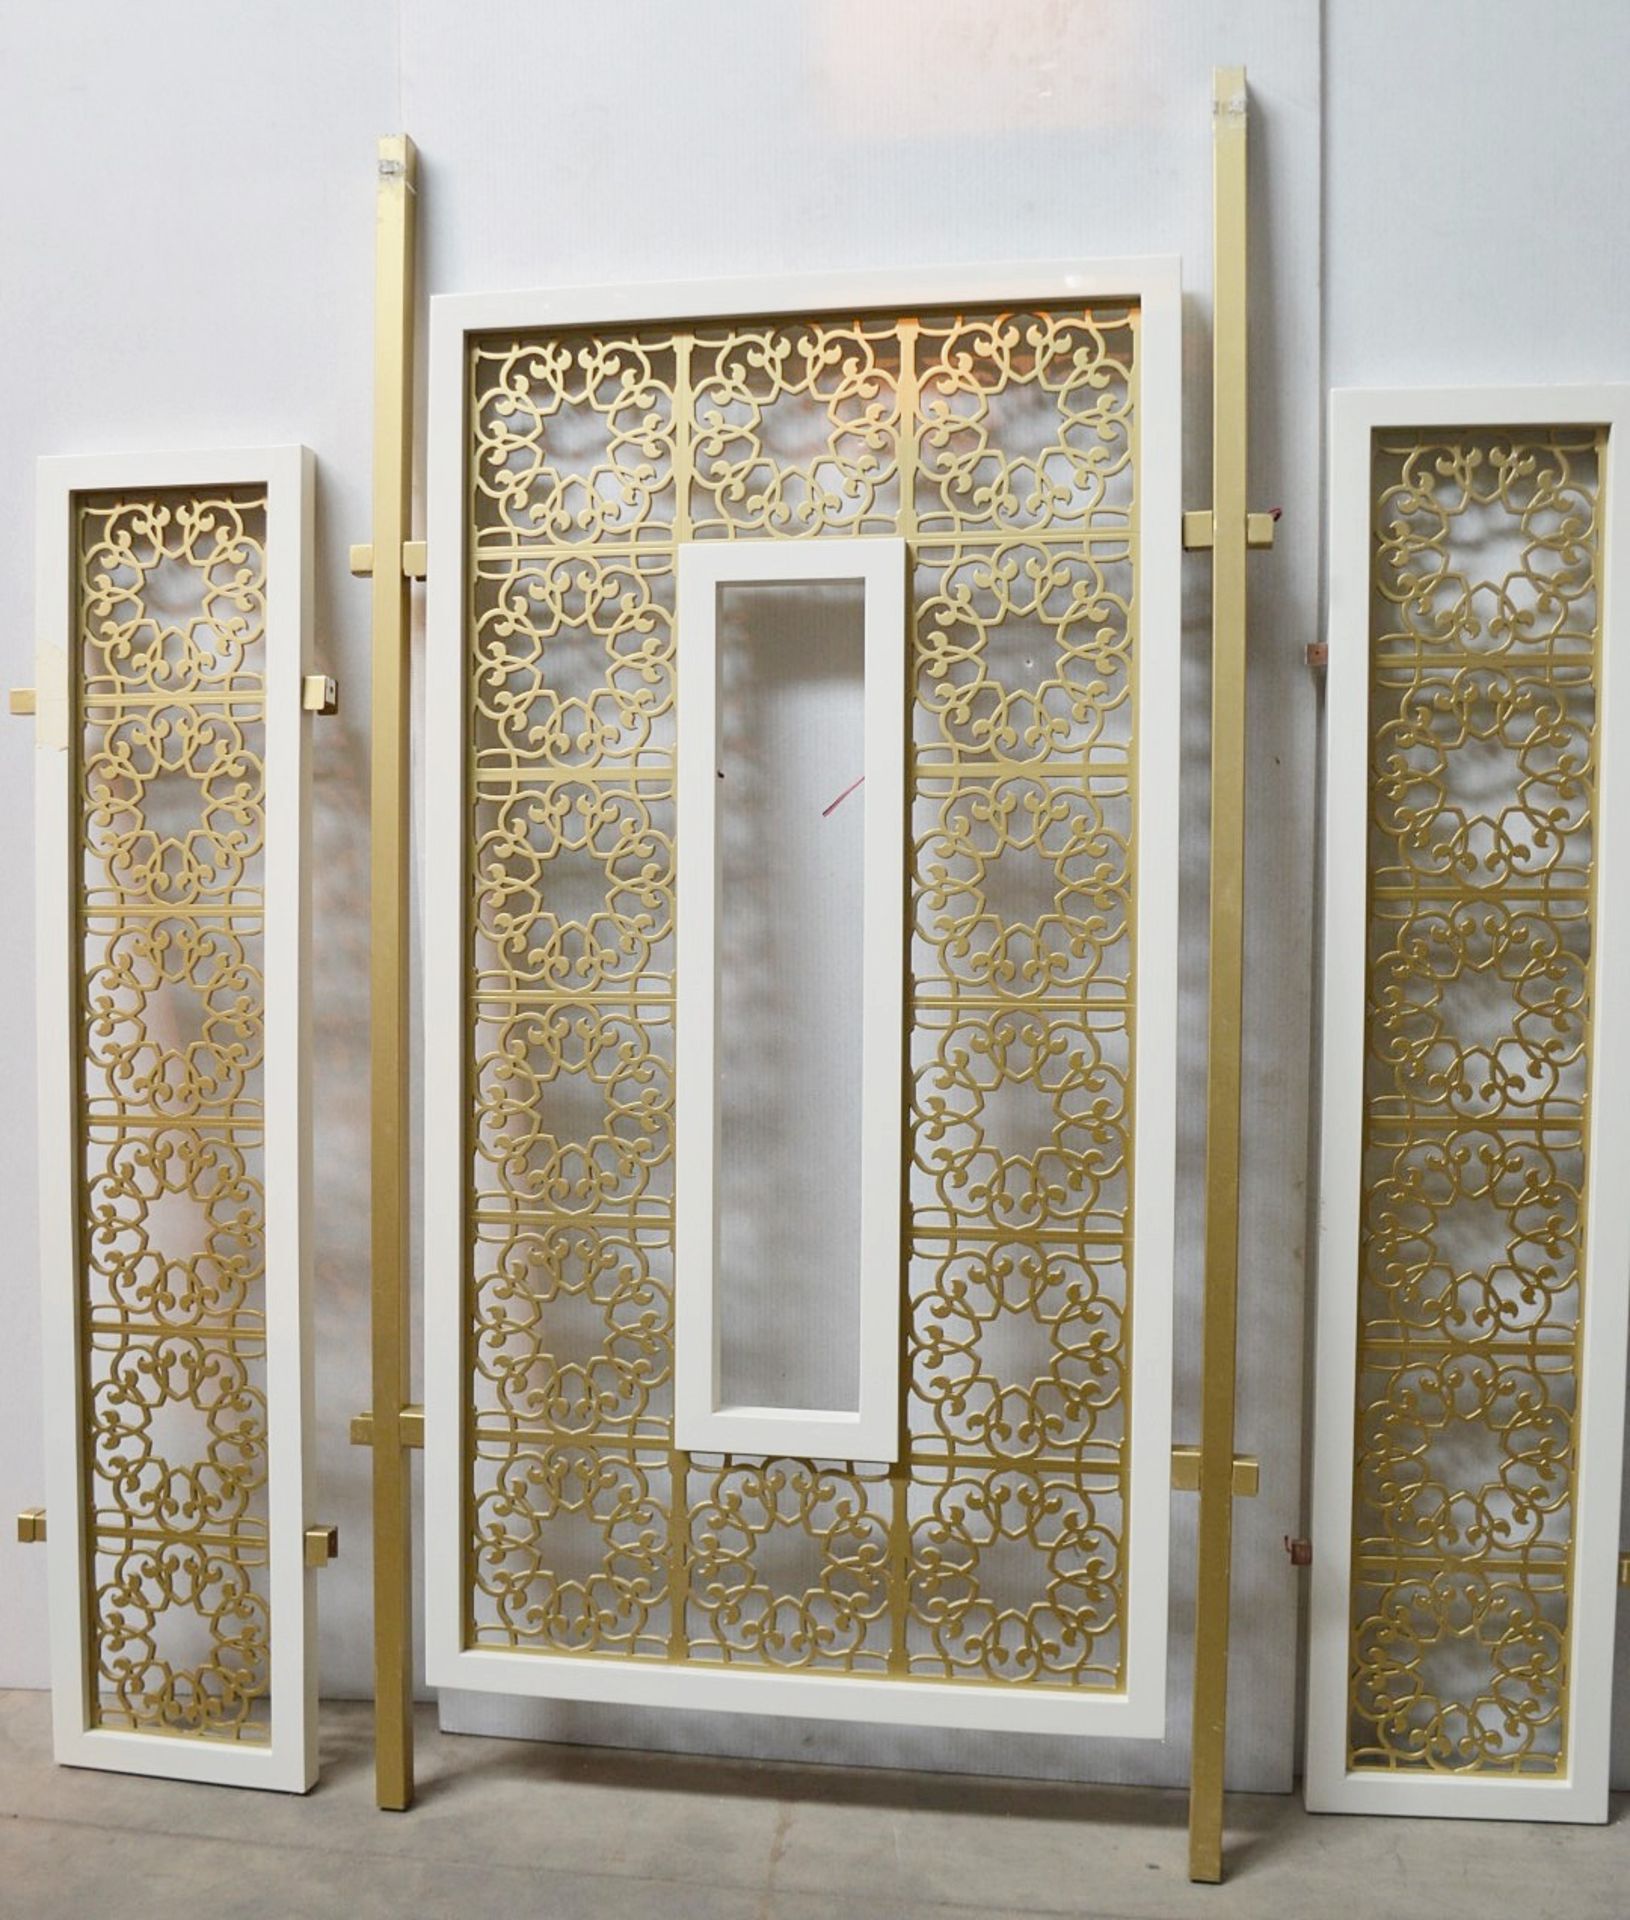 A Set Of 3 x Moroccan-style Room Divider Screen Panels With Pendant Light - Ref: HMS108 - CL668 - - Image 9 of 10